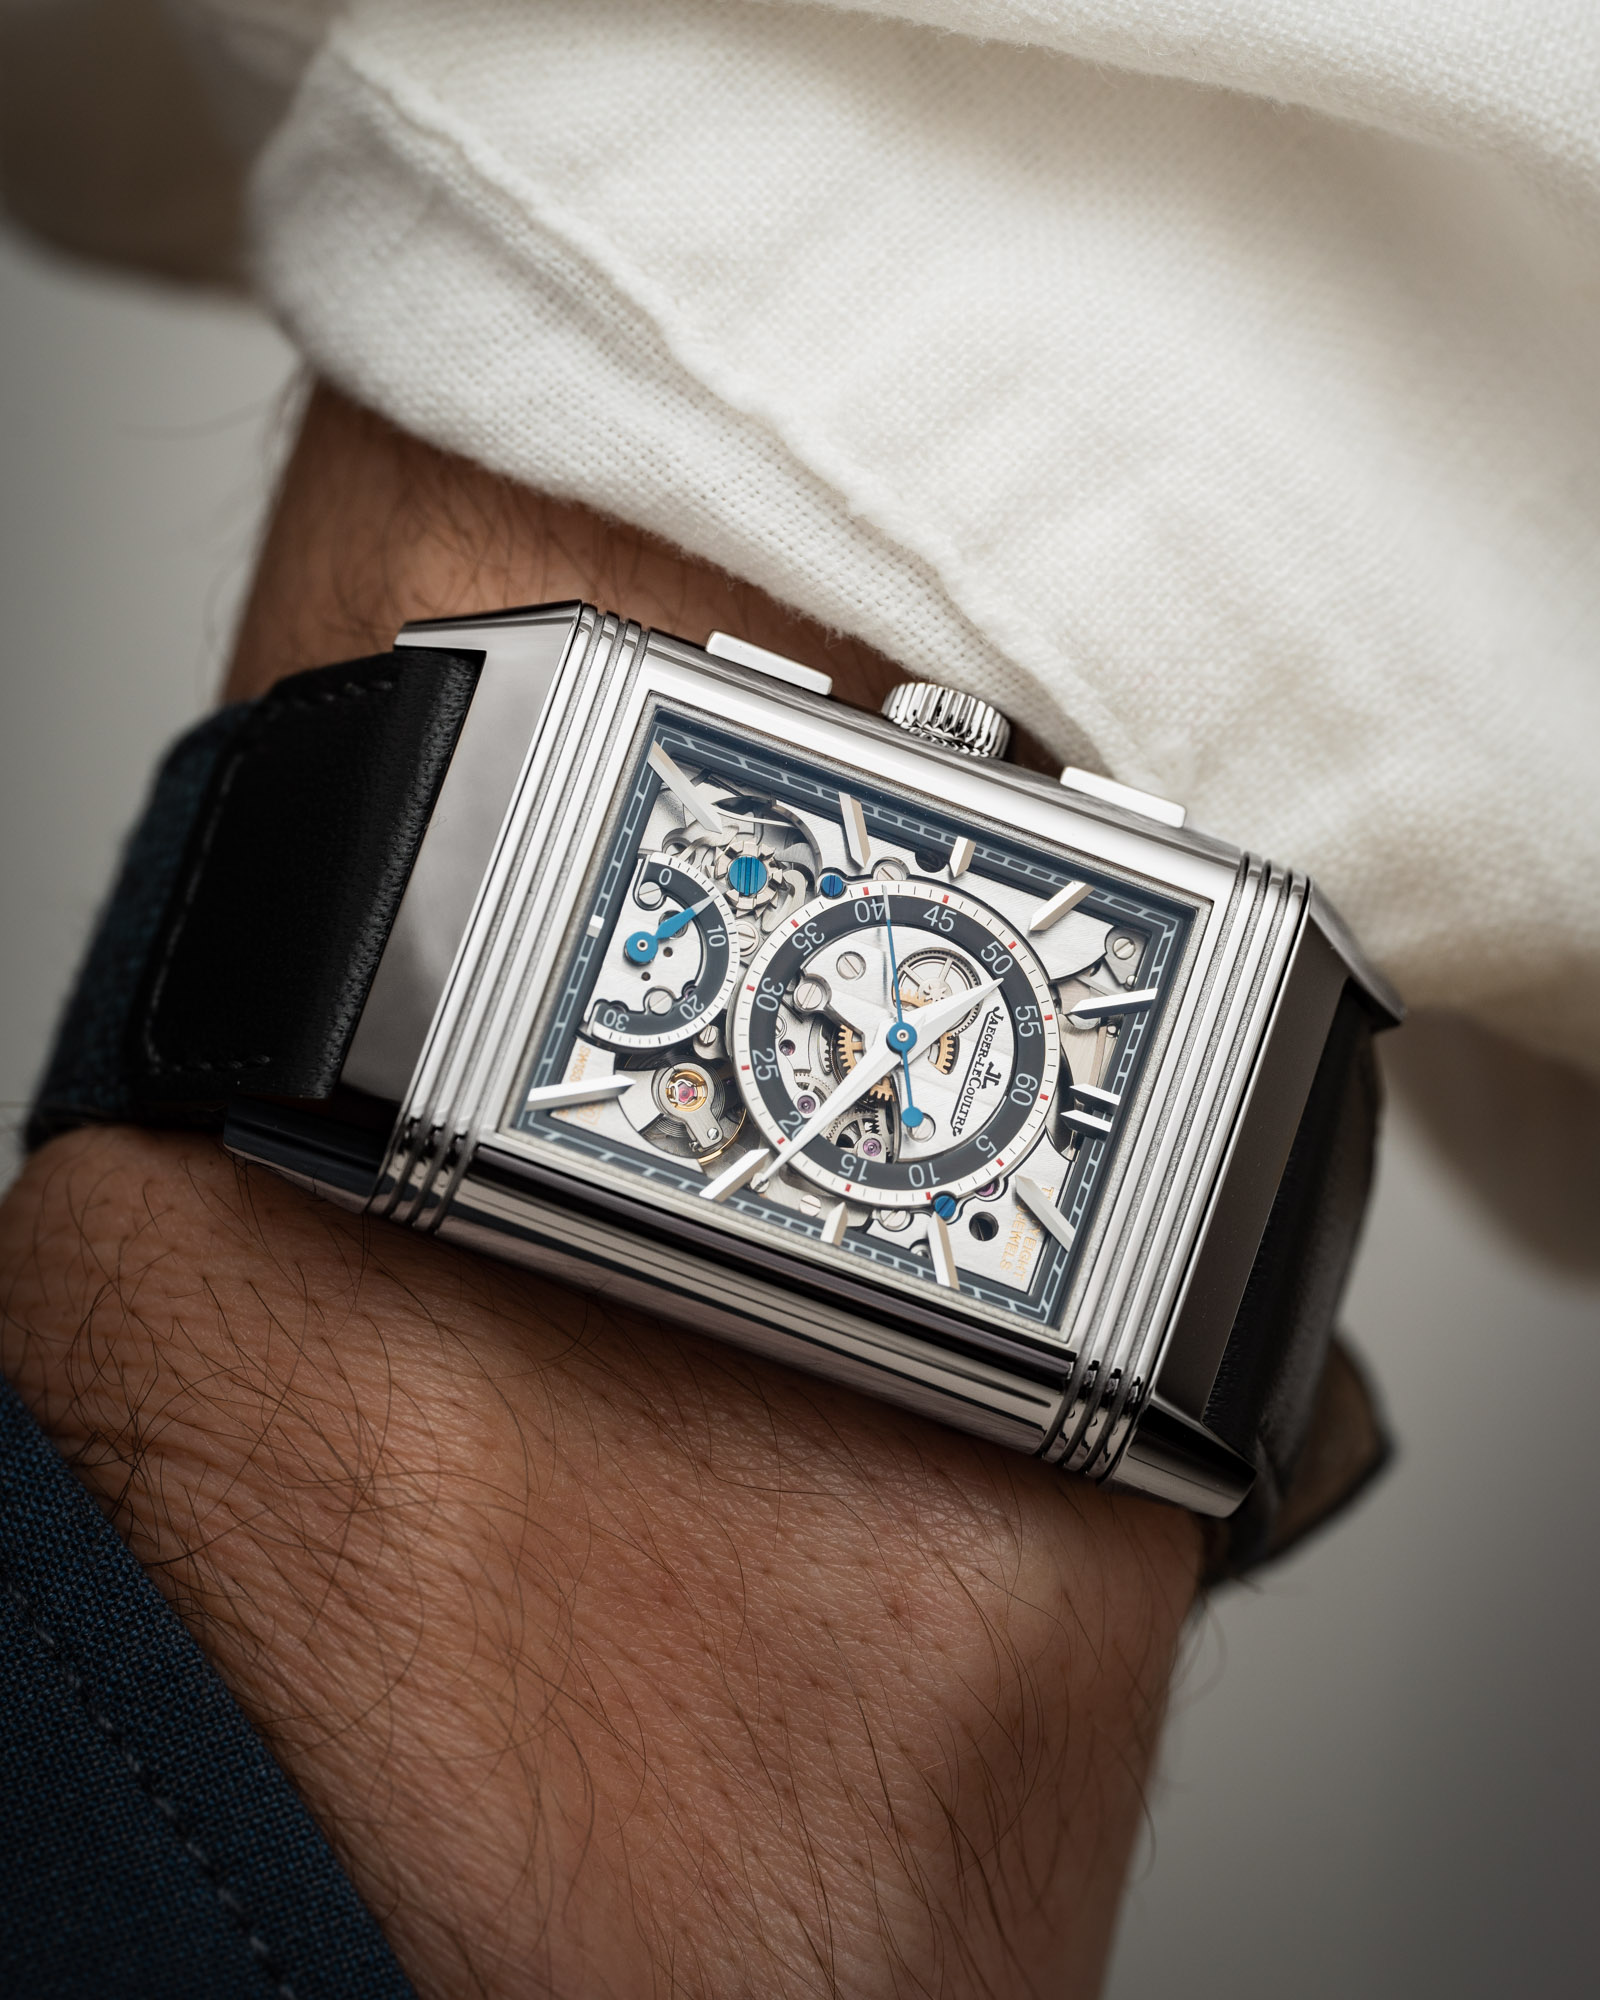 Hands-On: Jaeger-LeCoultre Reverso Tribute Chronograph Watch – Apex Chronos